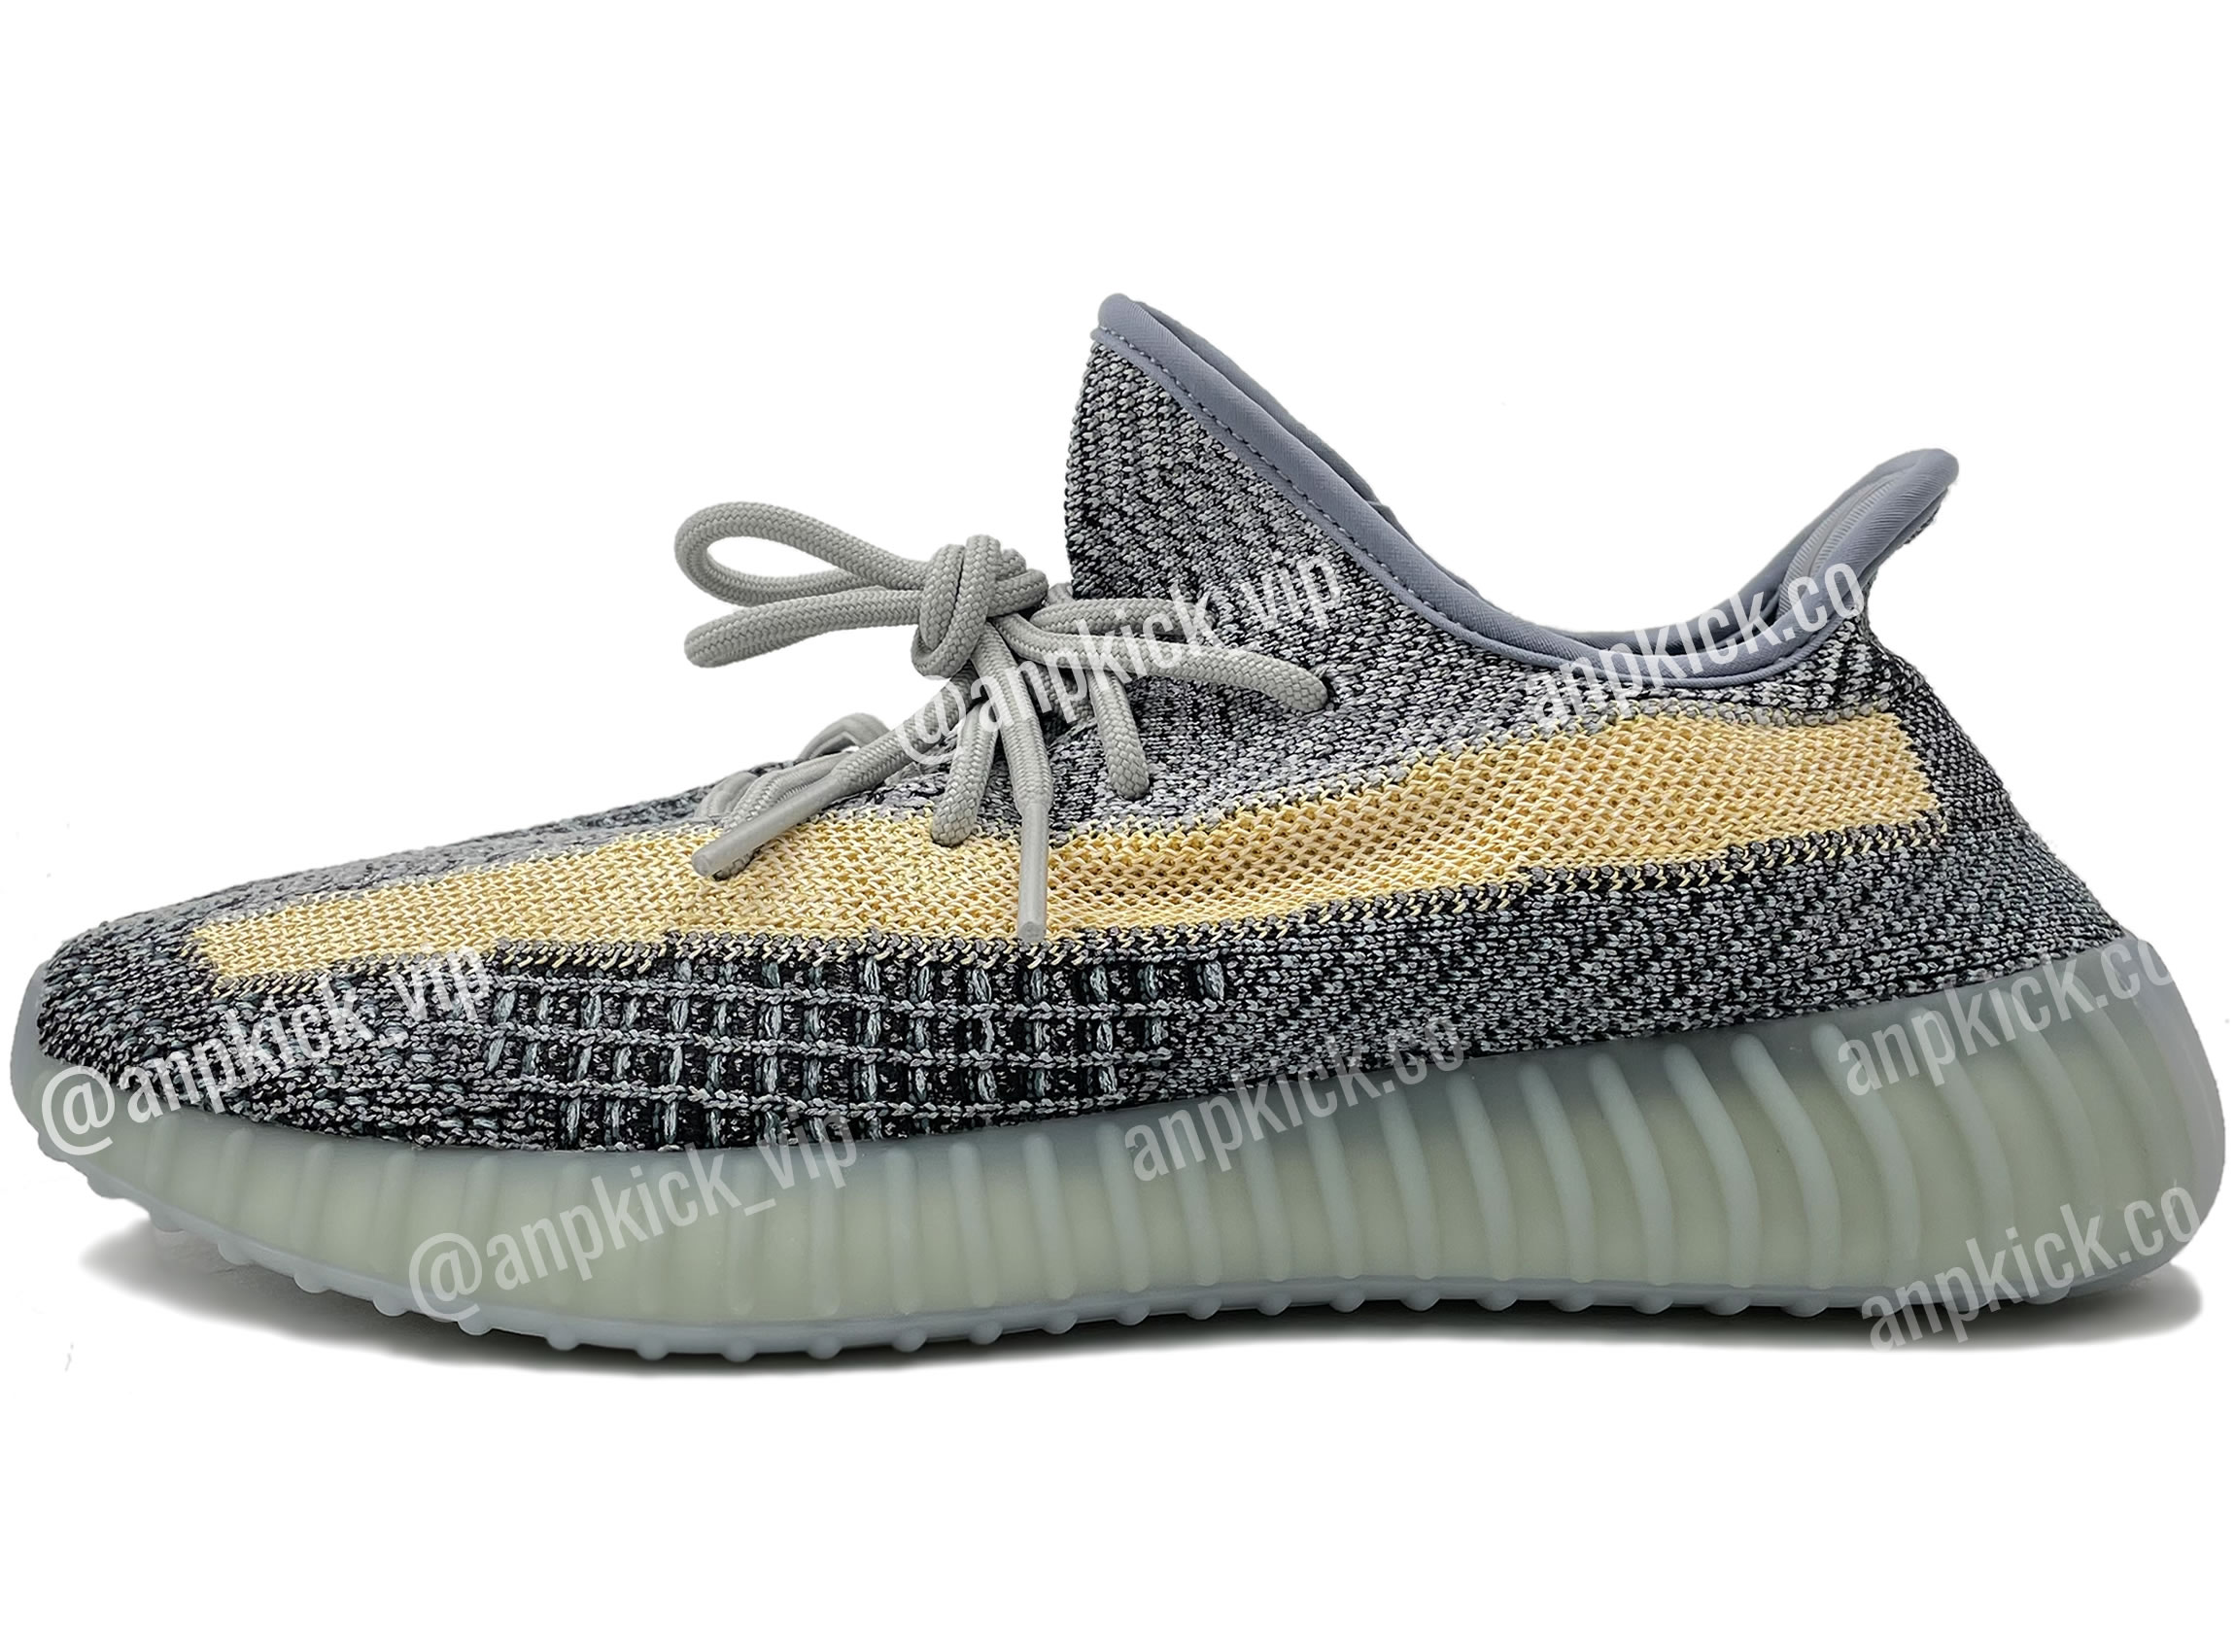 adidas Yeezy Boost 350 V2 'Ash Blue' GY7657 First Look